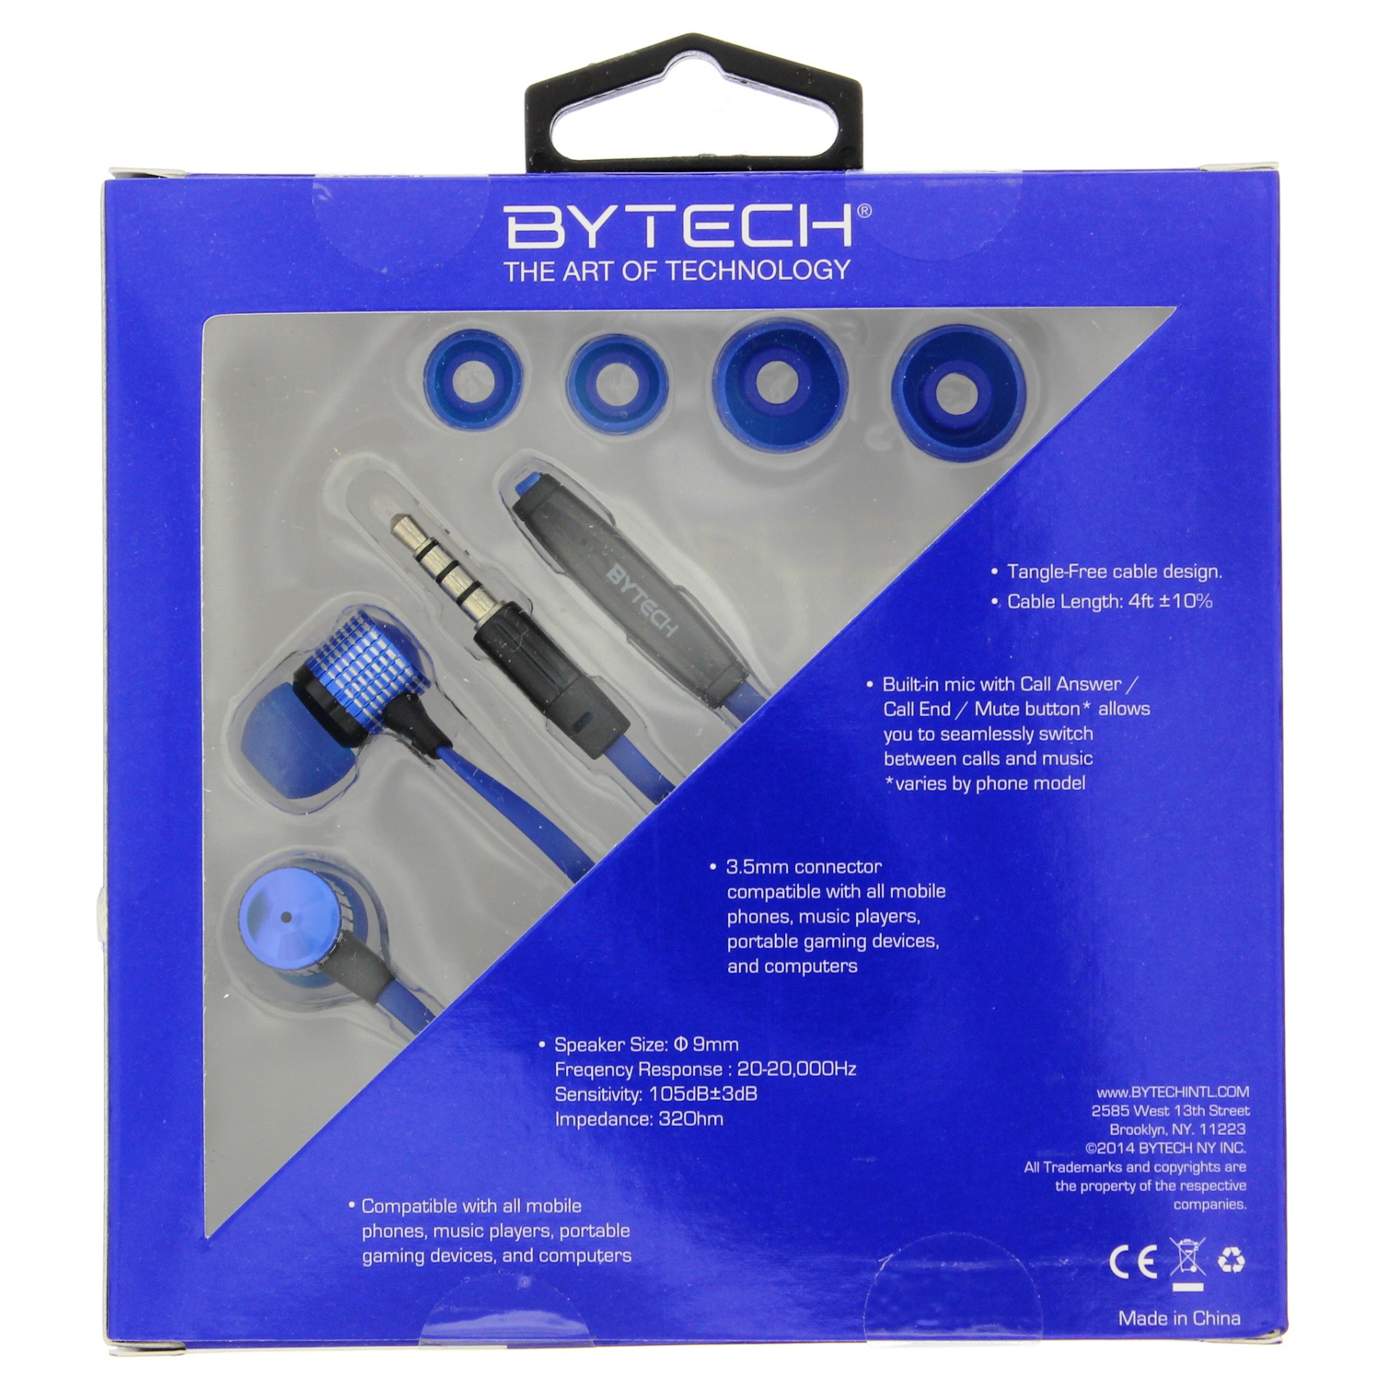 Bytech Stereo Earbuds with Mic - Blue; image 2 of 2